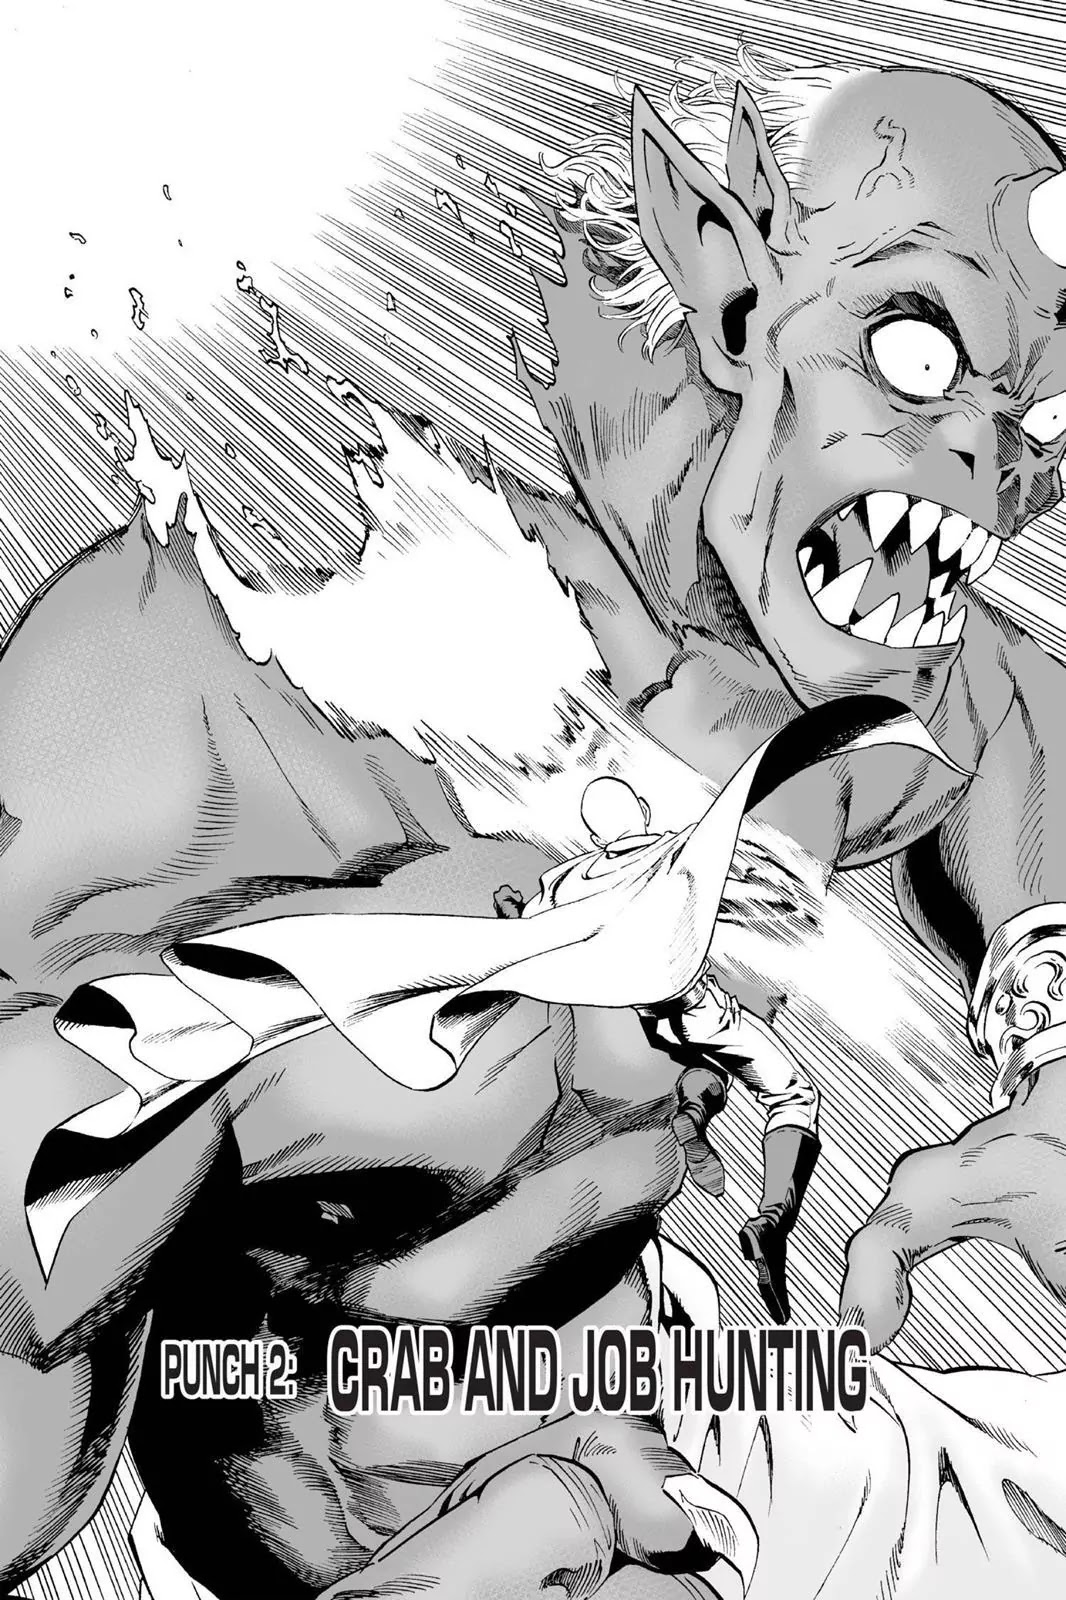 One Punch Man, Chapter 2 Crab And Job Hunting image 01